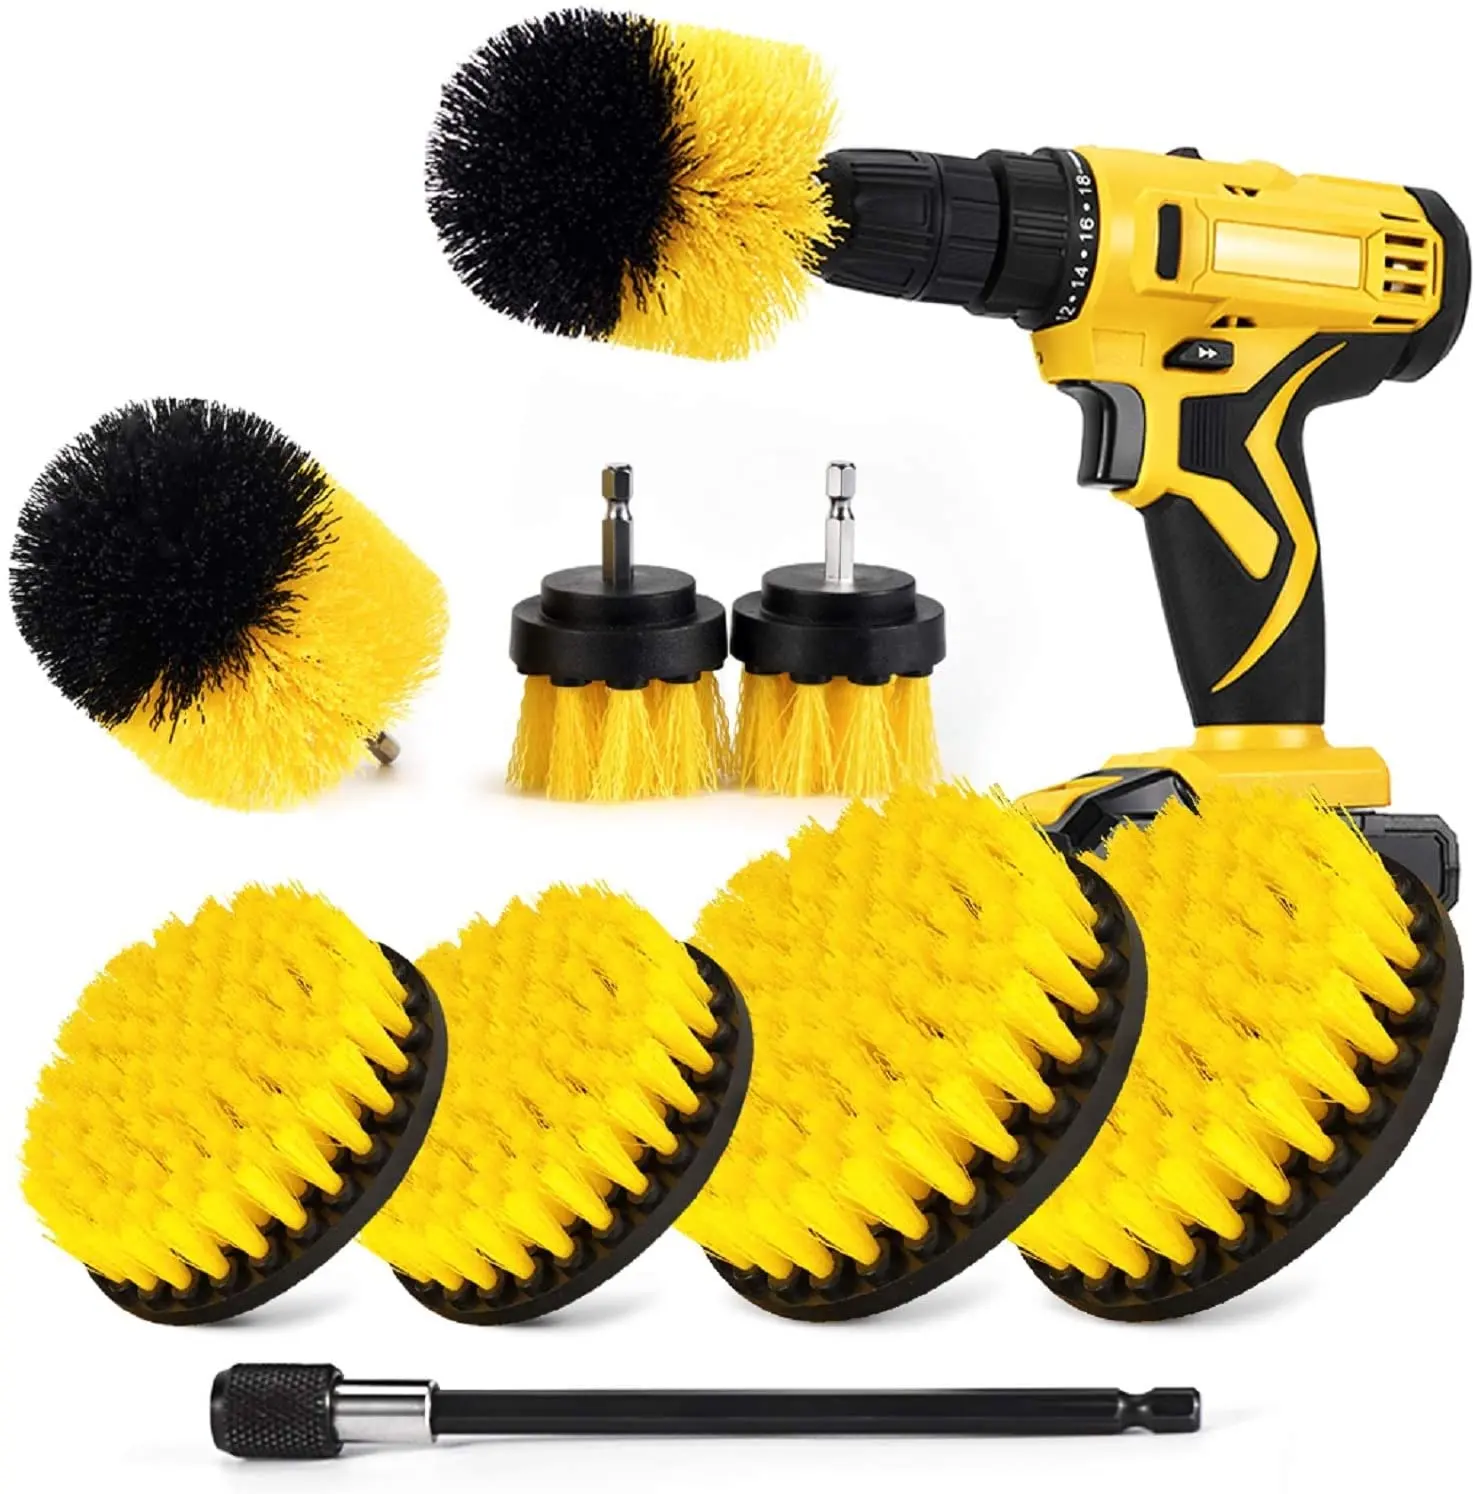 9 Pcs China Factory Drill Cleaning Brush Power Scrubber Electric Set For Car/Bathroom/Floor/Toliet